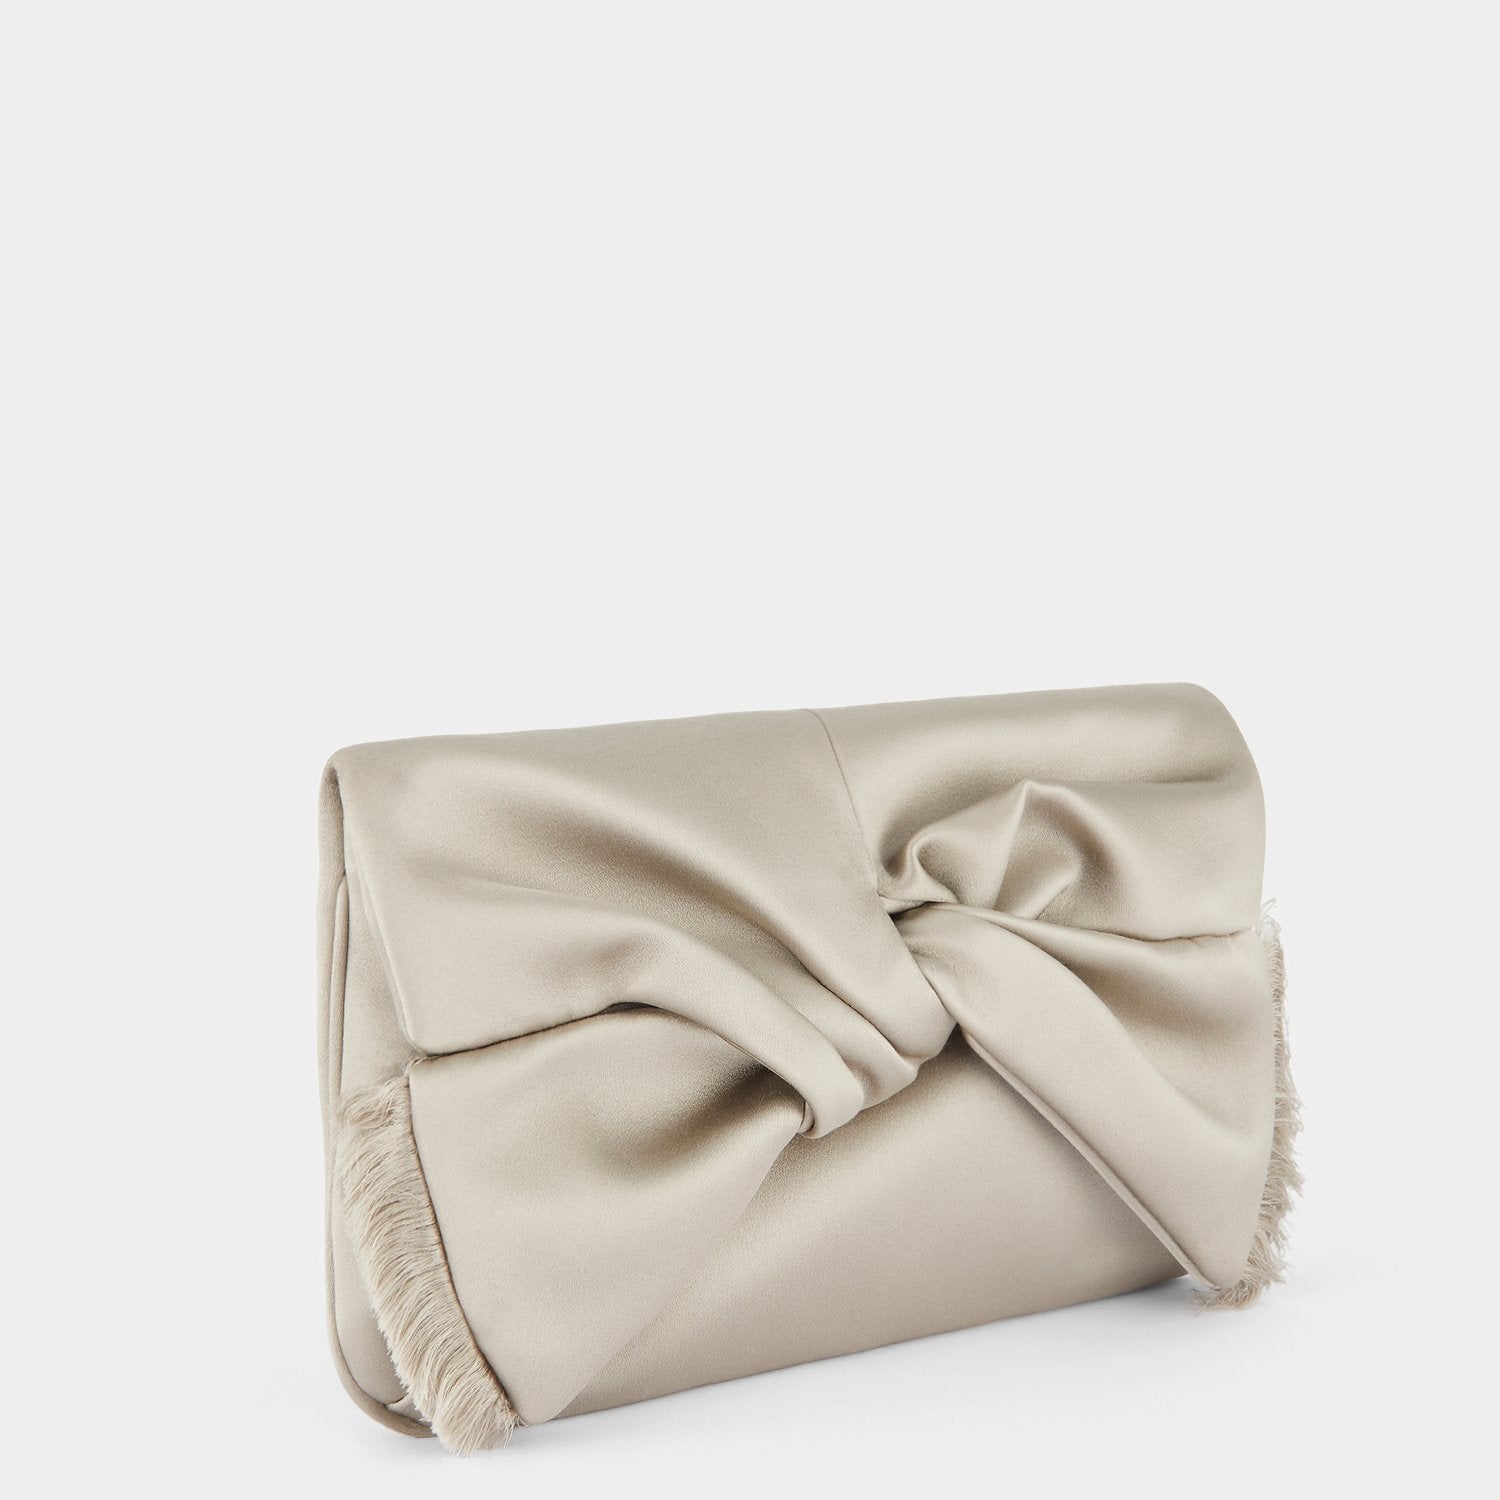 Anya Hindmarch Bow Clutch Bag in Double Satin